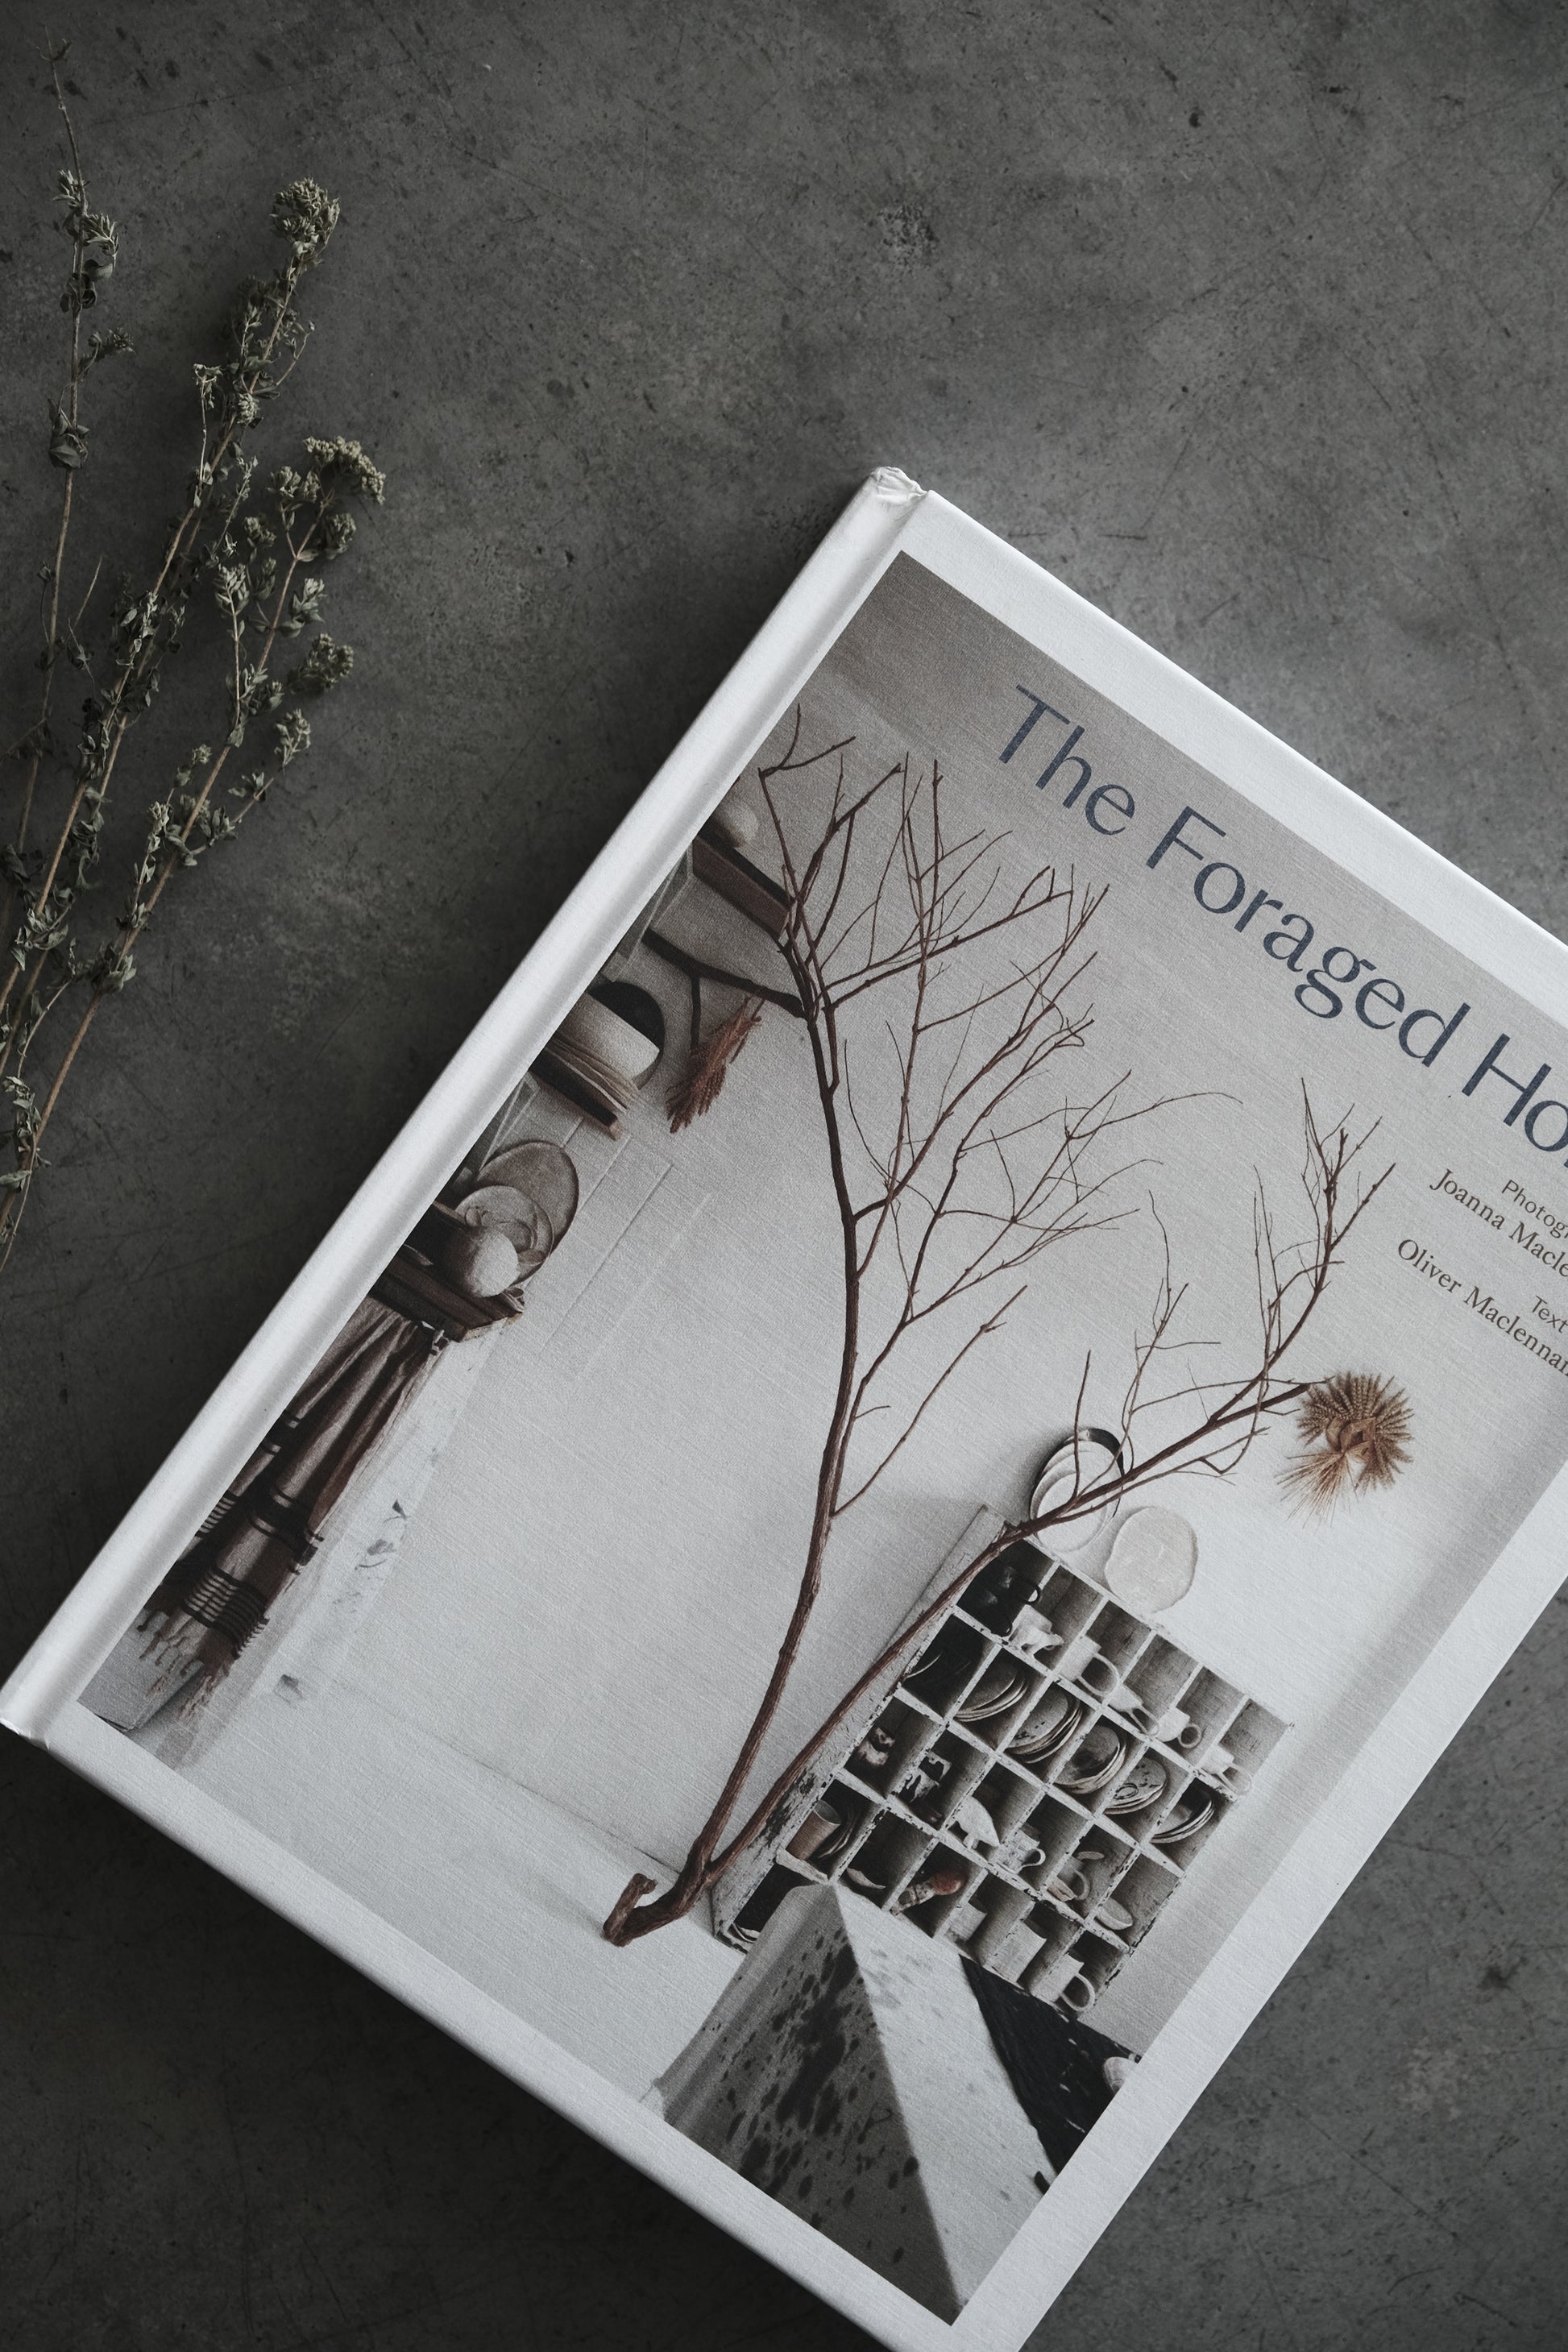 Image of the book The Foraged Home from Terra Cruda's book collection